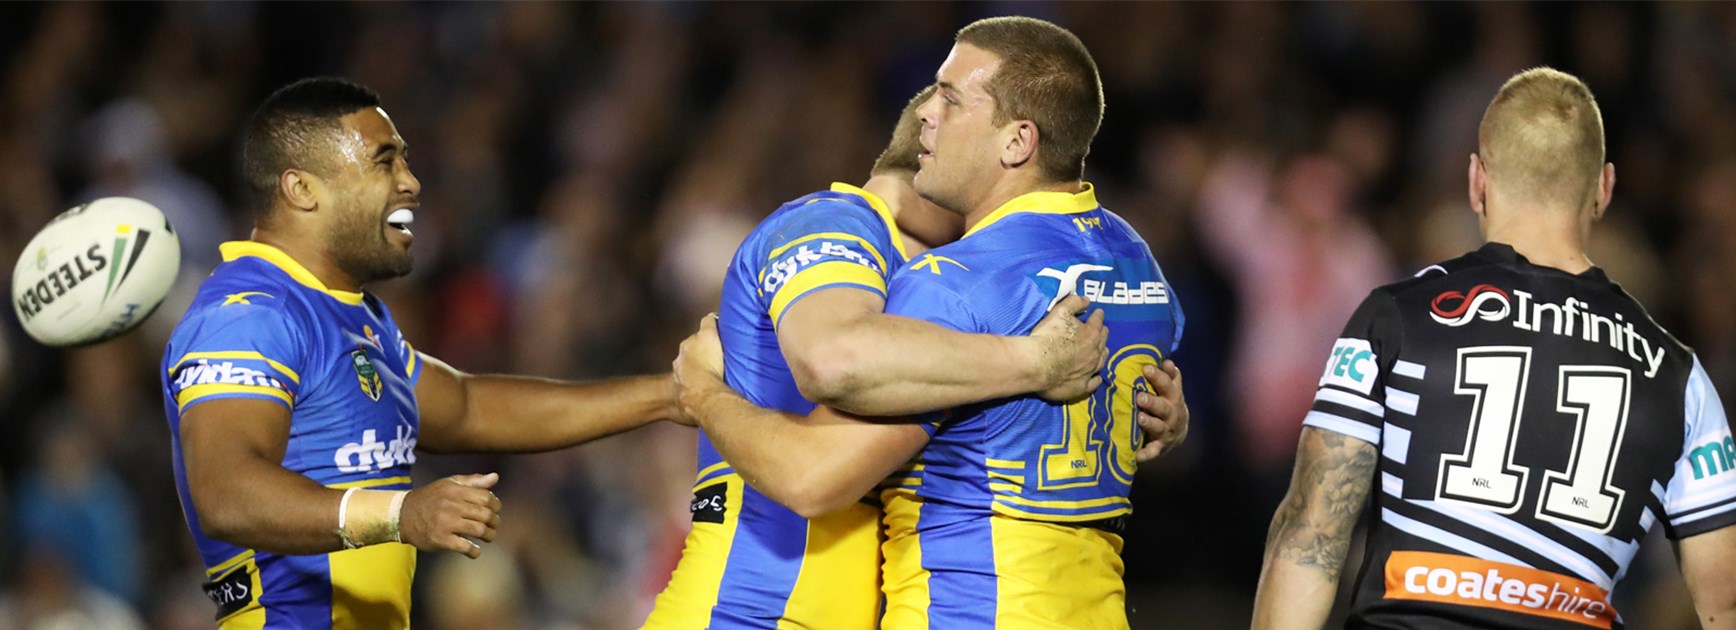 The Eels celebrate Danny Wicks's try against Cronulla on Saturday.